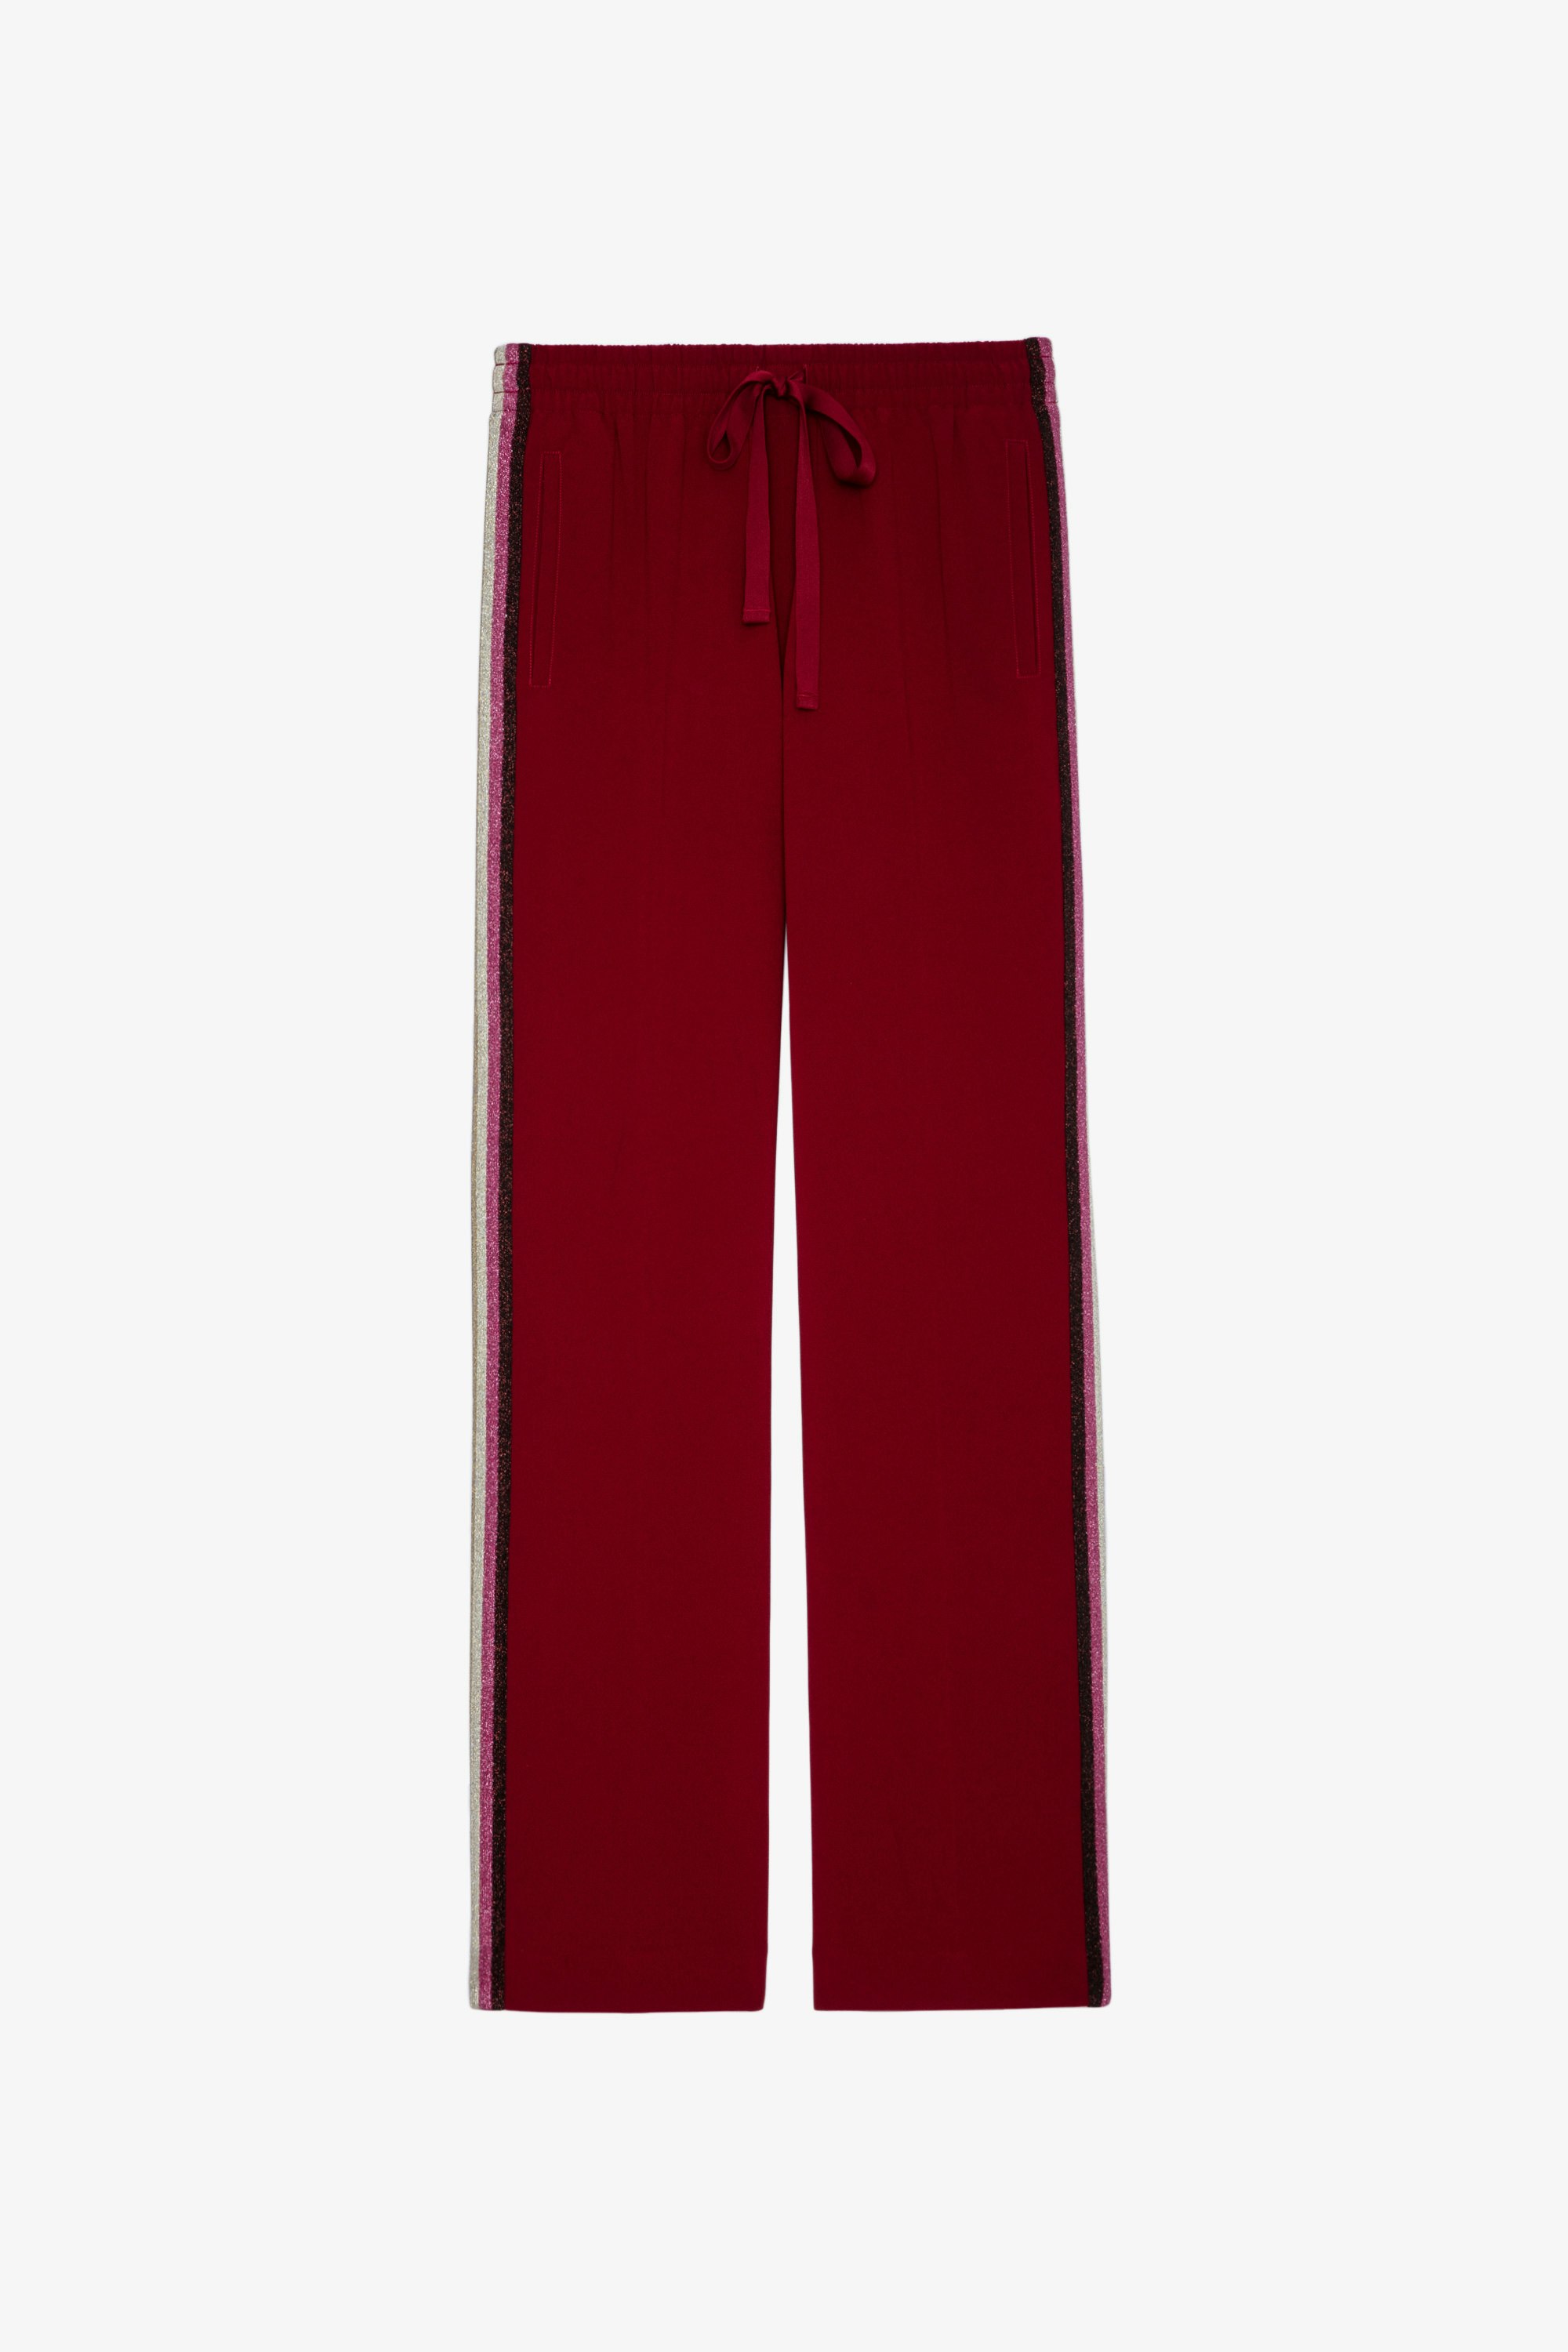 Pomy Trousers Women’s trousers with coloured glitter side bands